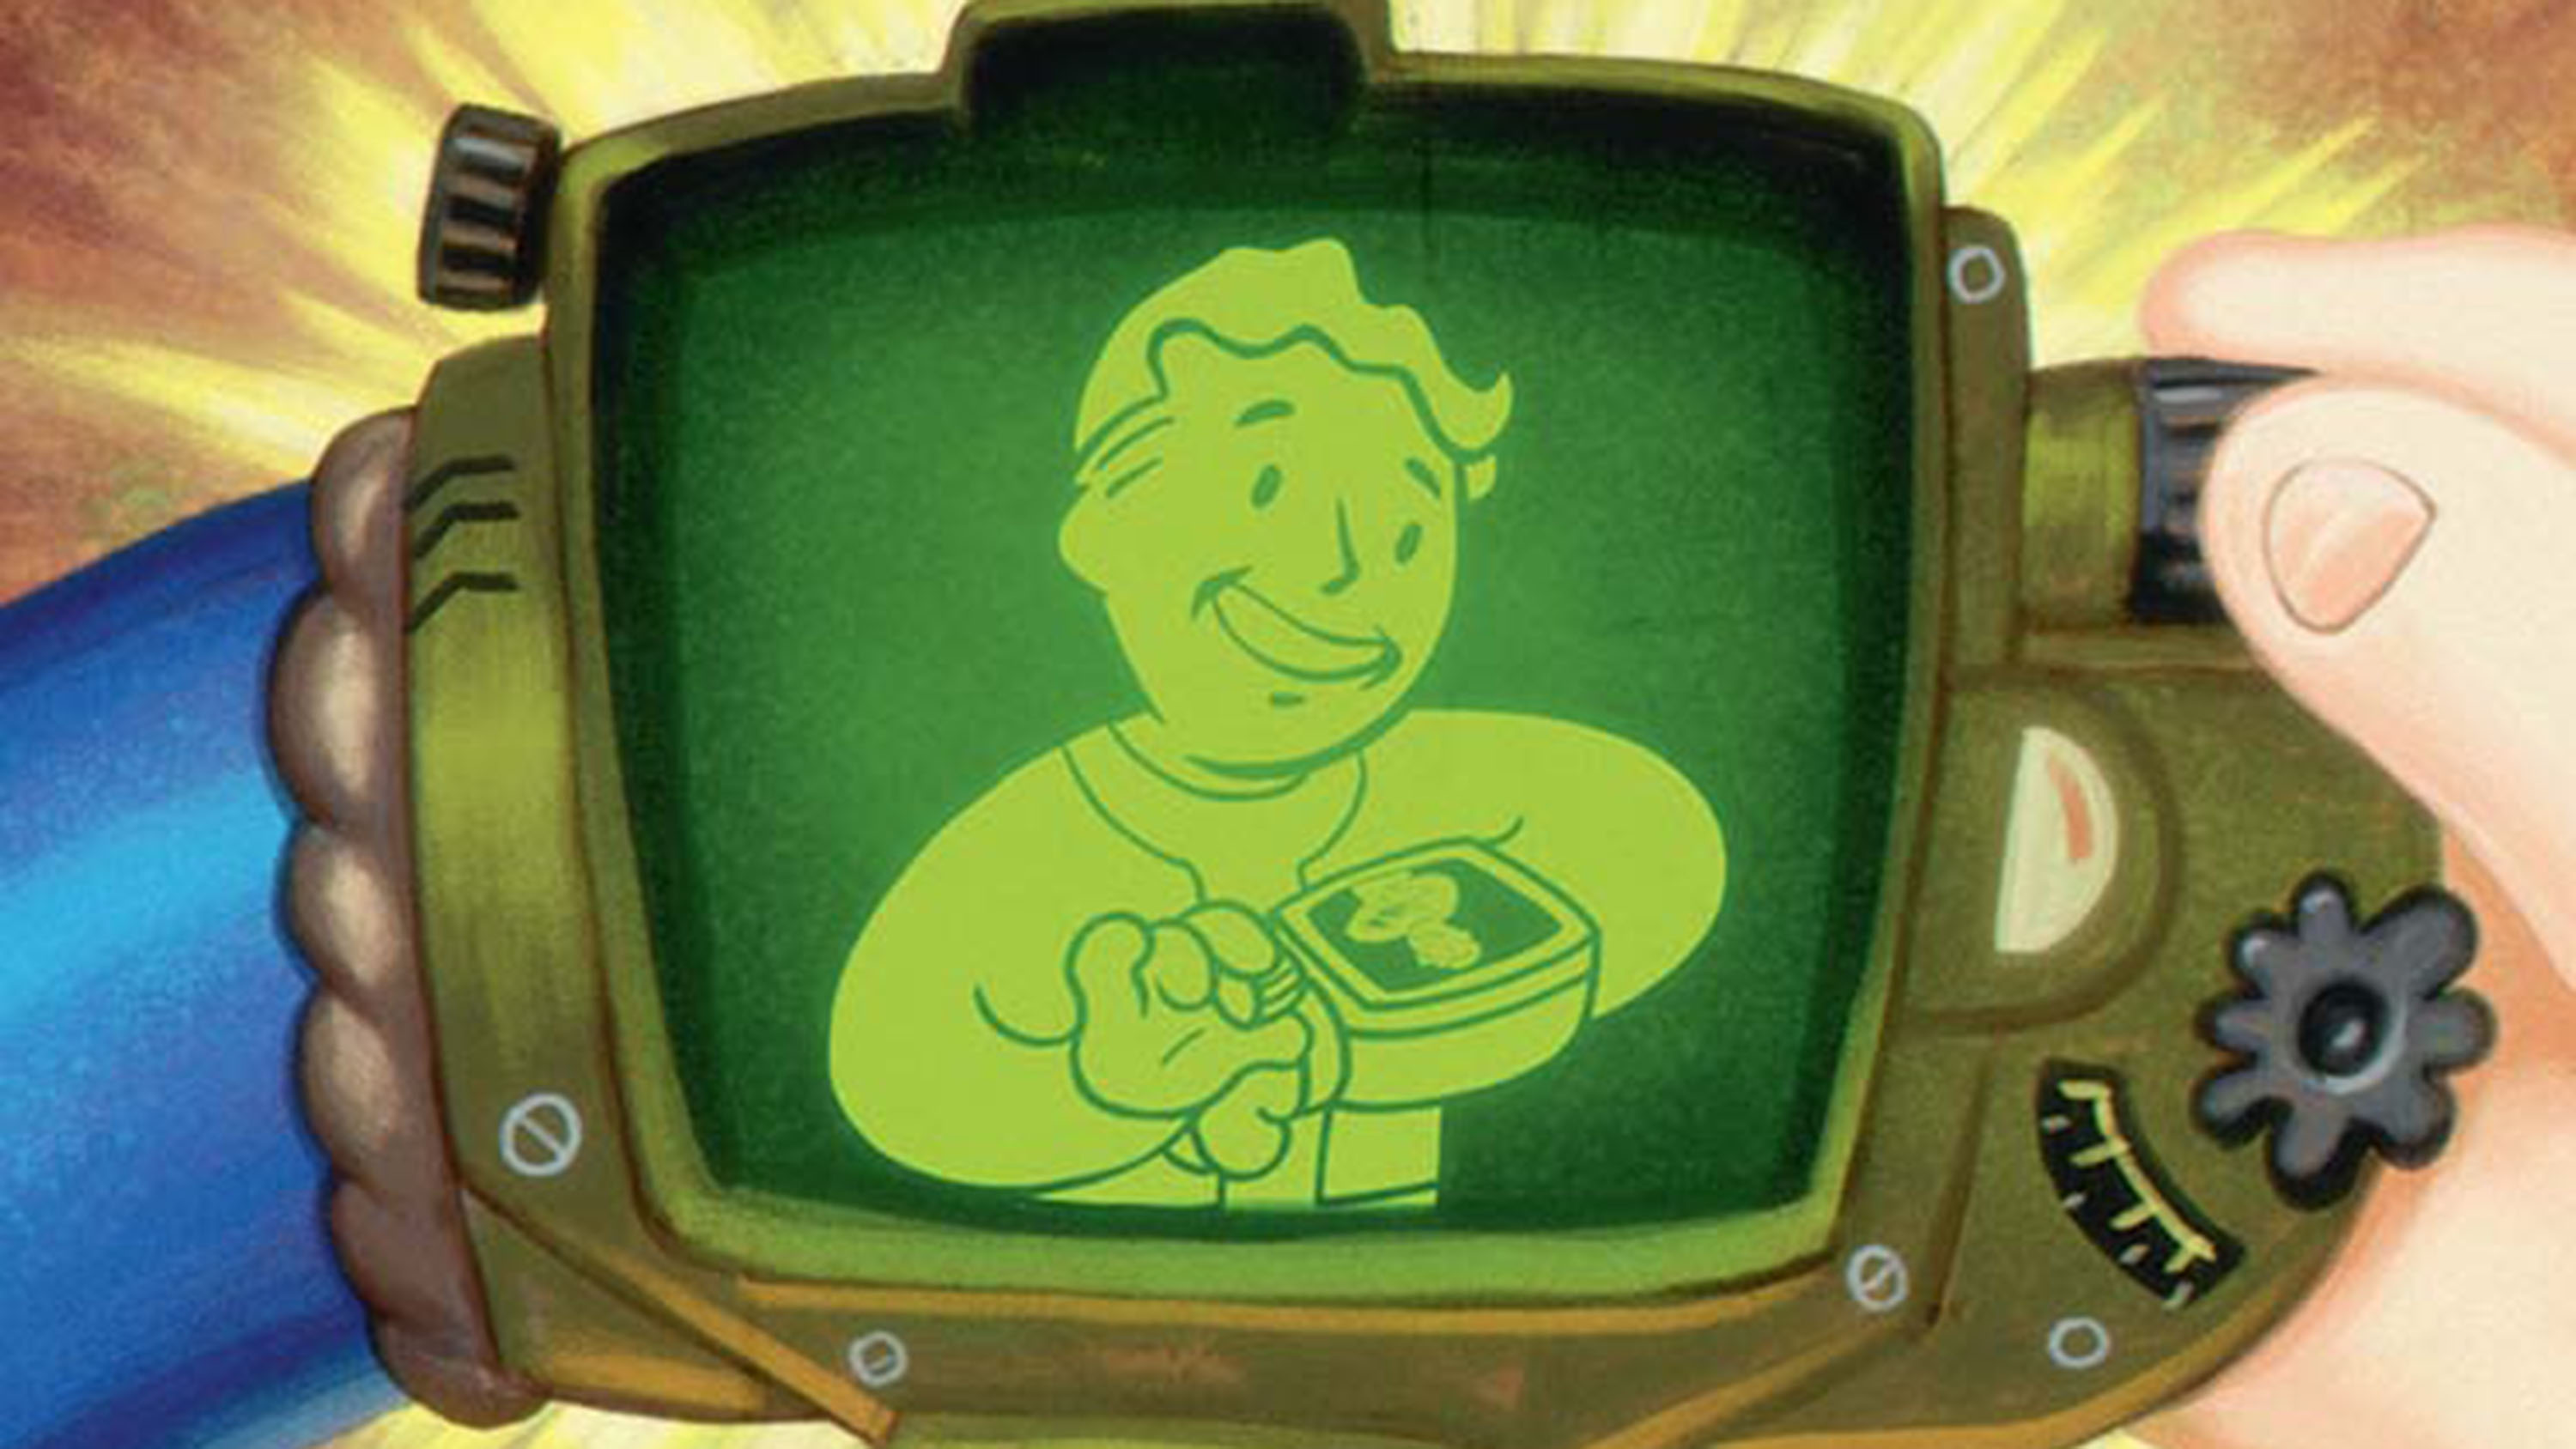 A close-up of the Pip-Boy’s Pip-Boy, which shows the Pip-Boy using a Pip-Boy.